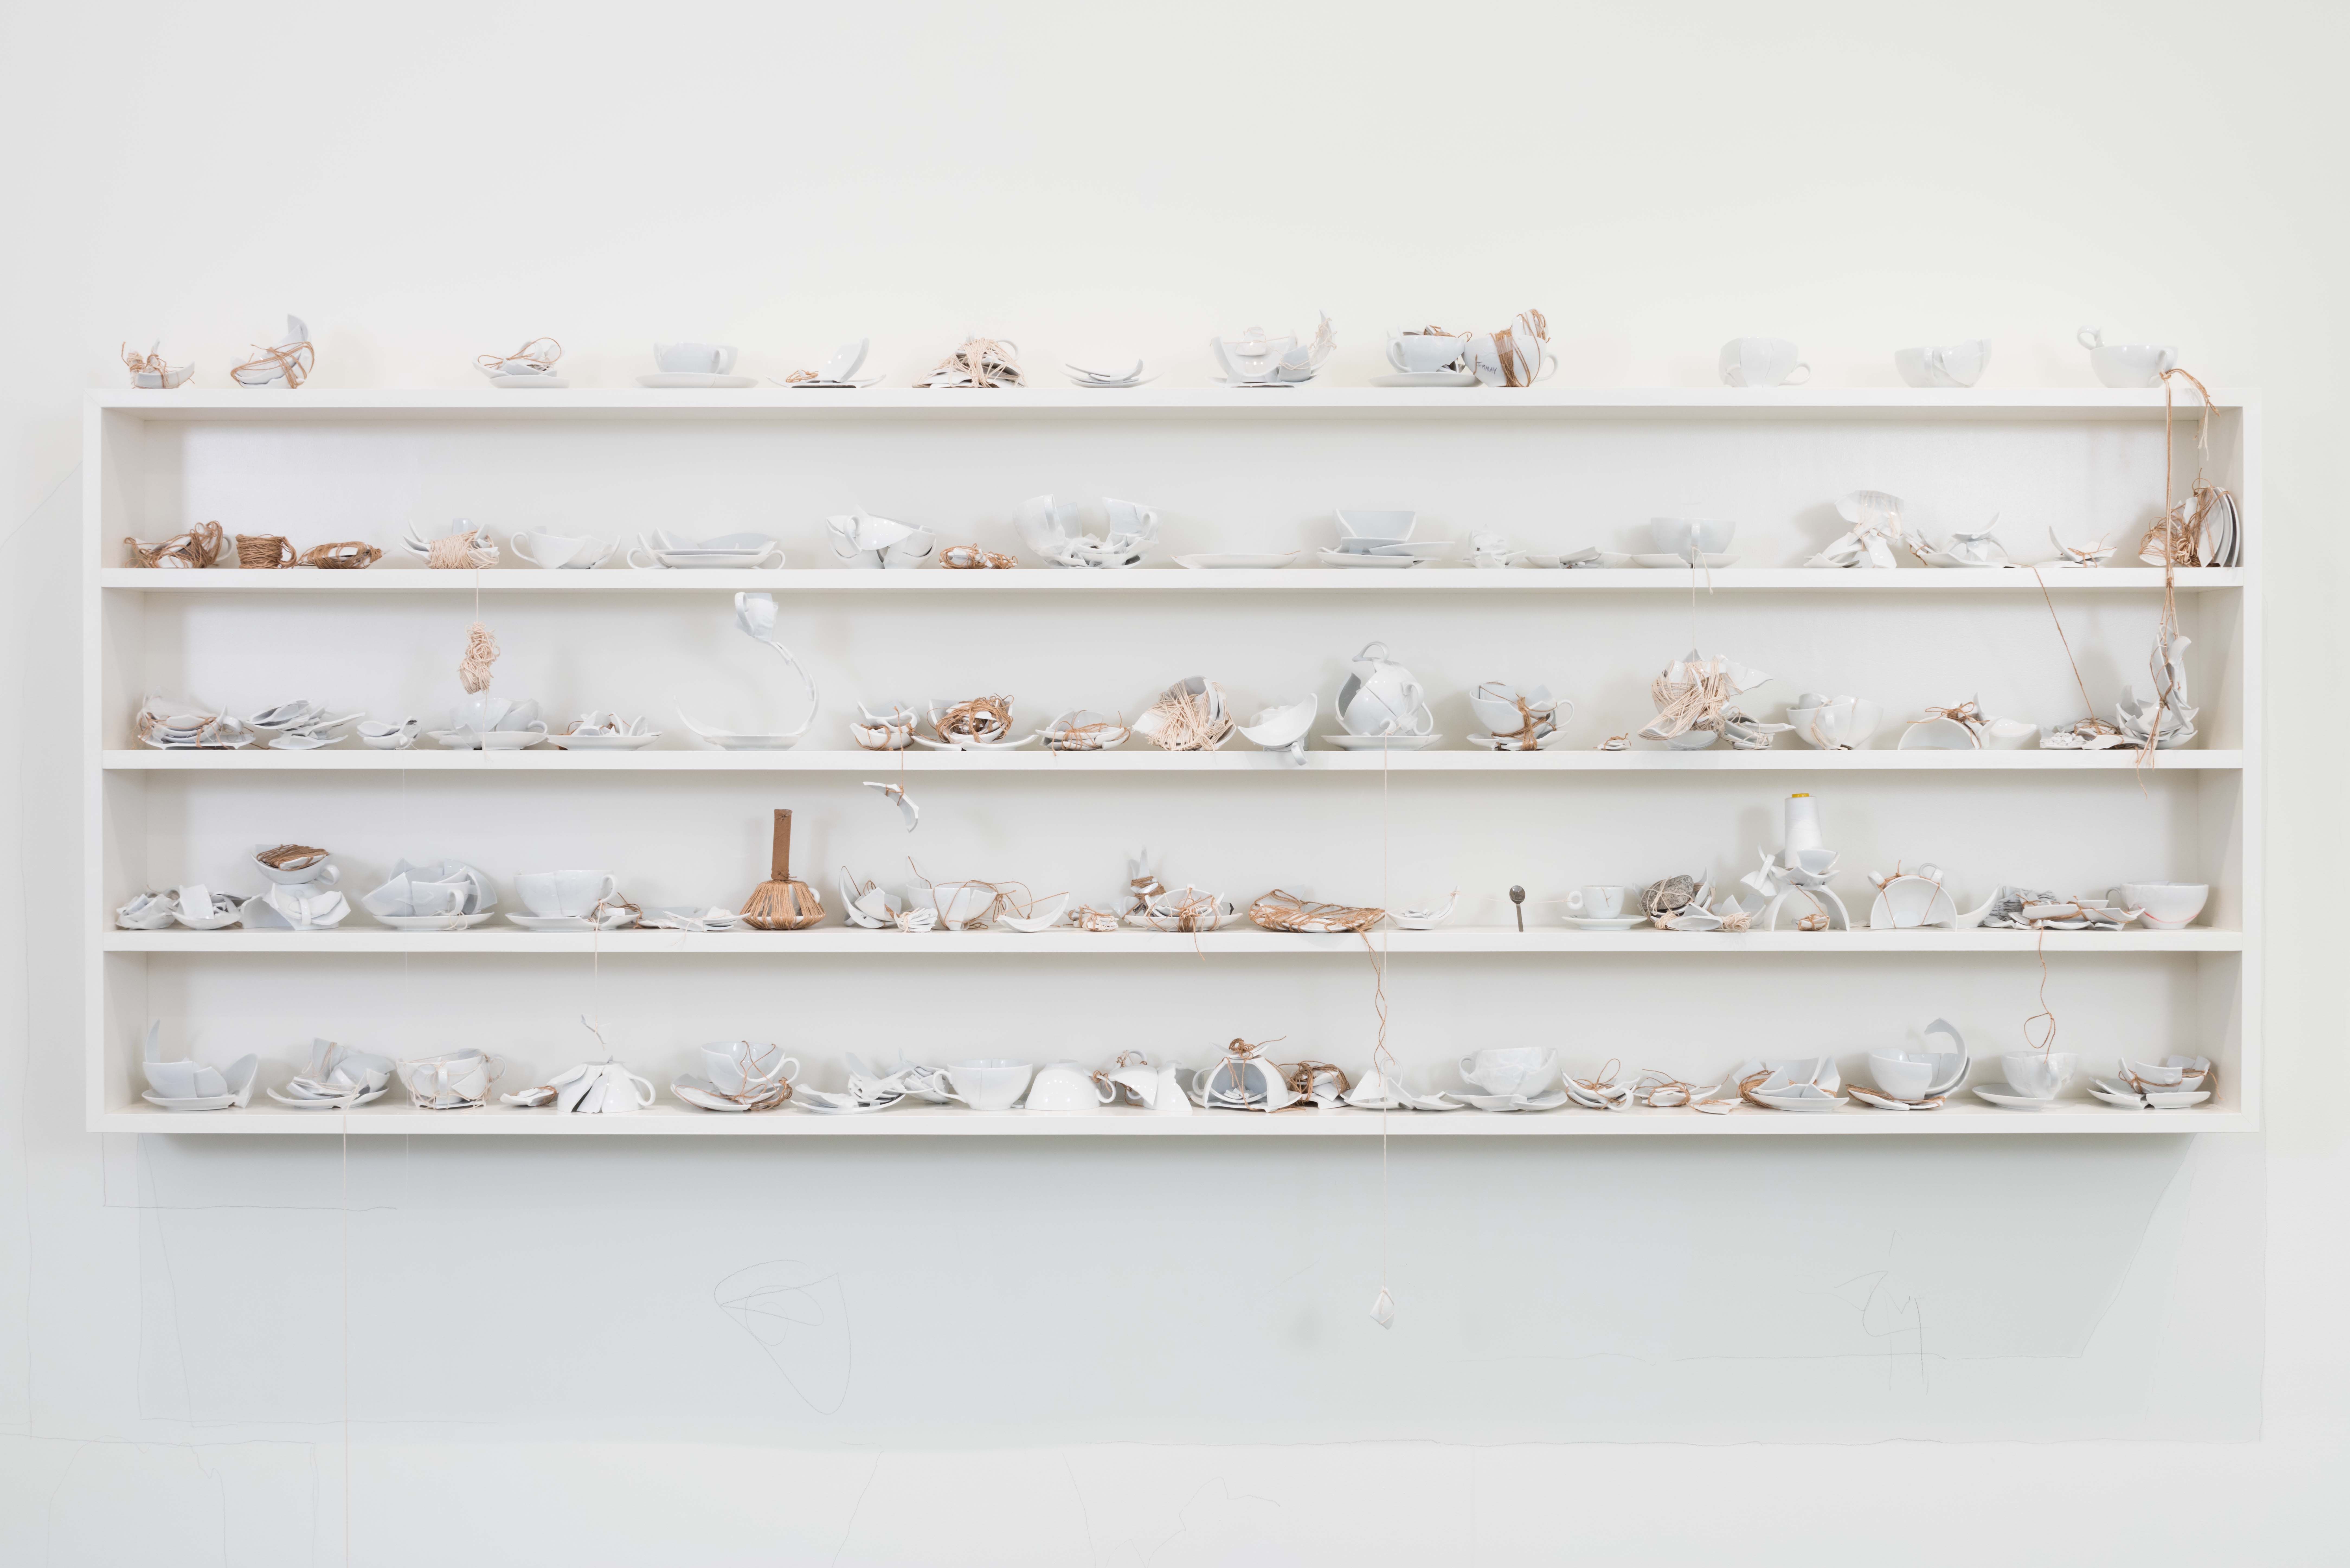 Yoko Ono, Mend Piece (1966/2015). Ceramic, glue, tape, scissors, and twine dimensions variable. Photographer: Pierre Le Hors.